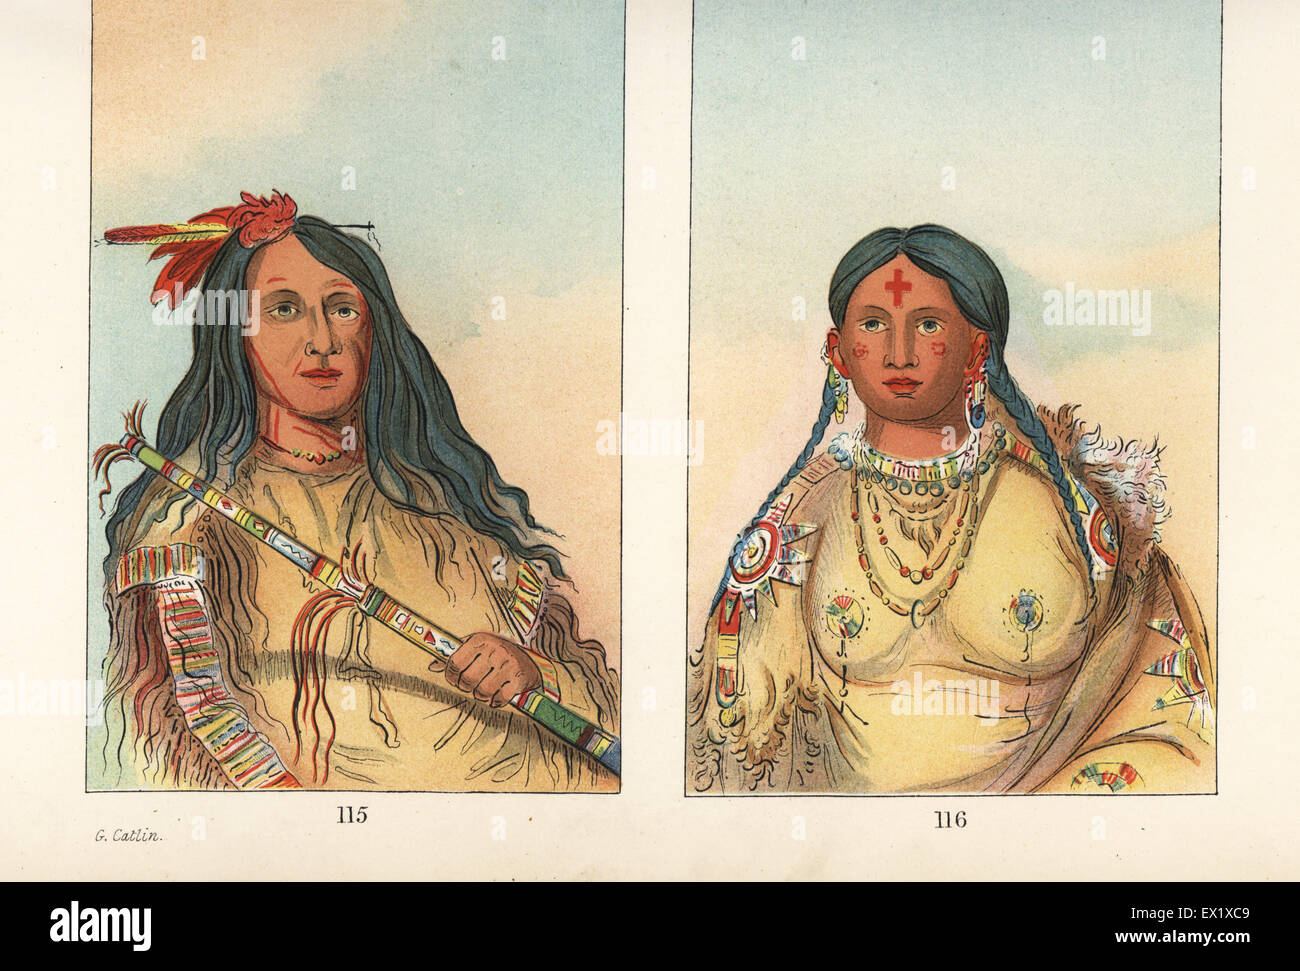 Nee-hee-o-ee-woo-tis, the Wolf on the Hill, chief of the Cheyenne nation, and a woman, Tis-see-woo-na-tis, She who Bathes her Knees. Handcoloured lithograph from George Catlin's Manners, Customs and Condition of the North American Indians, London, 1841. Stock Photo